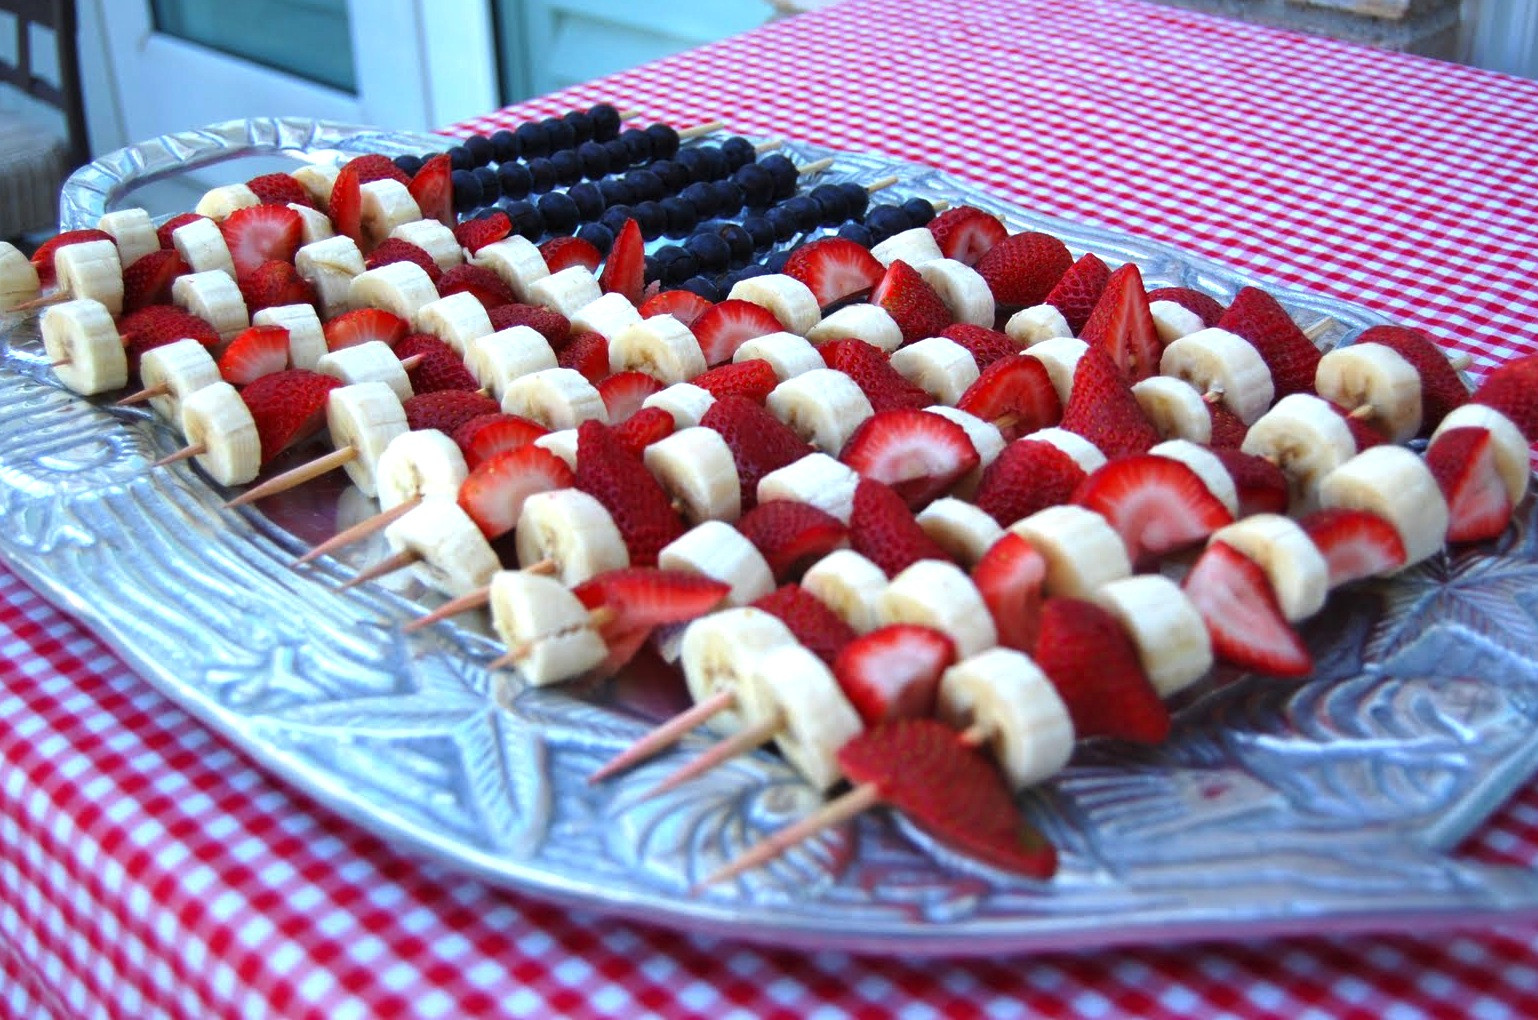 4th Of July Bbq Food Ideas
 Awesome Food For Your July 4th BBQ LDS S M I L E